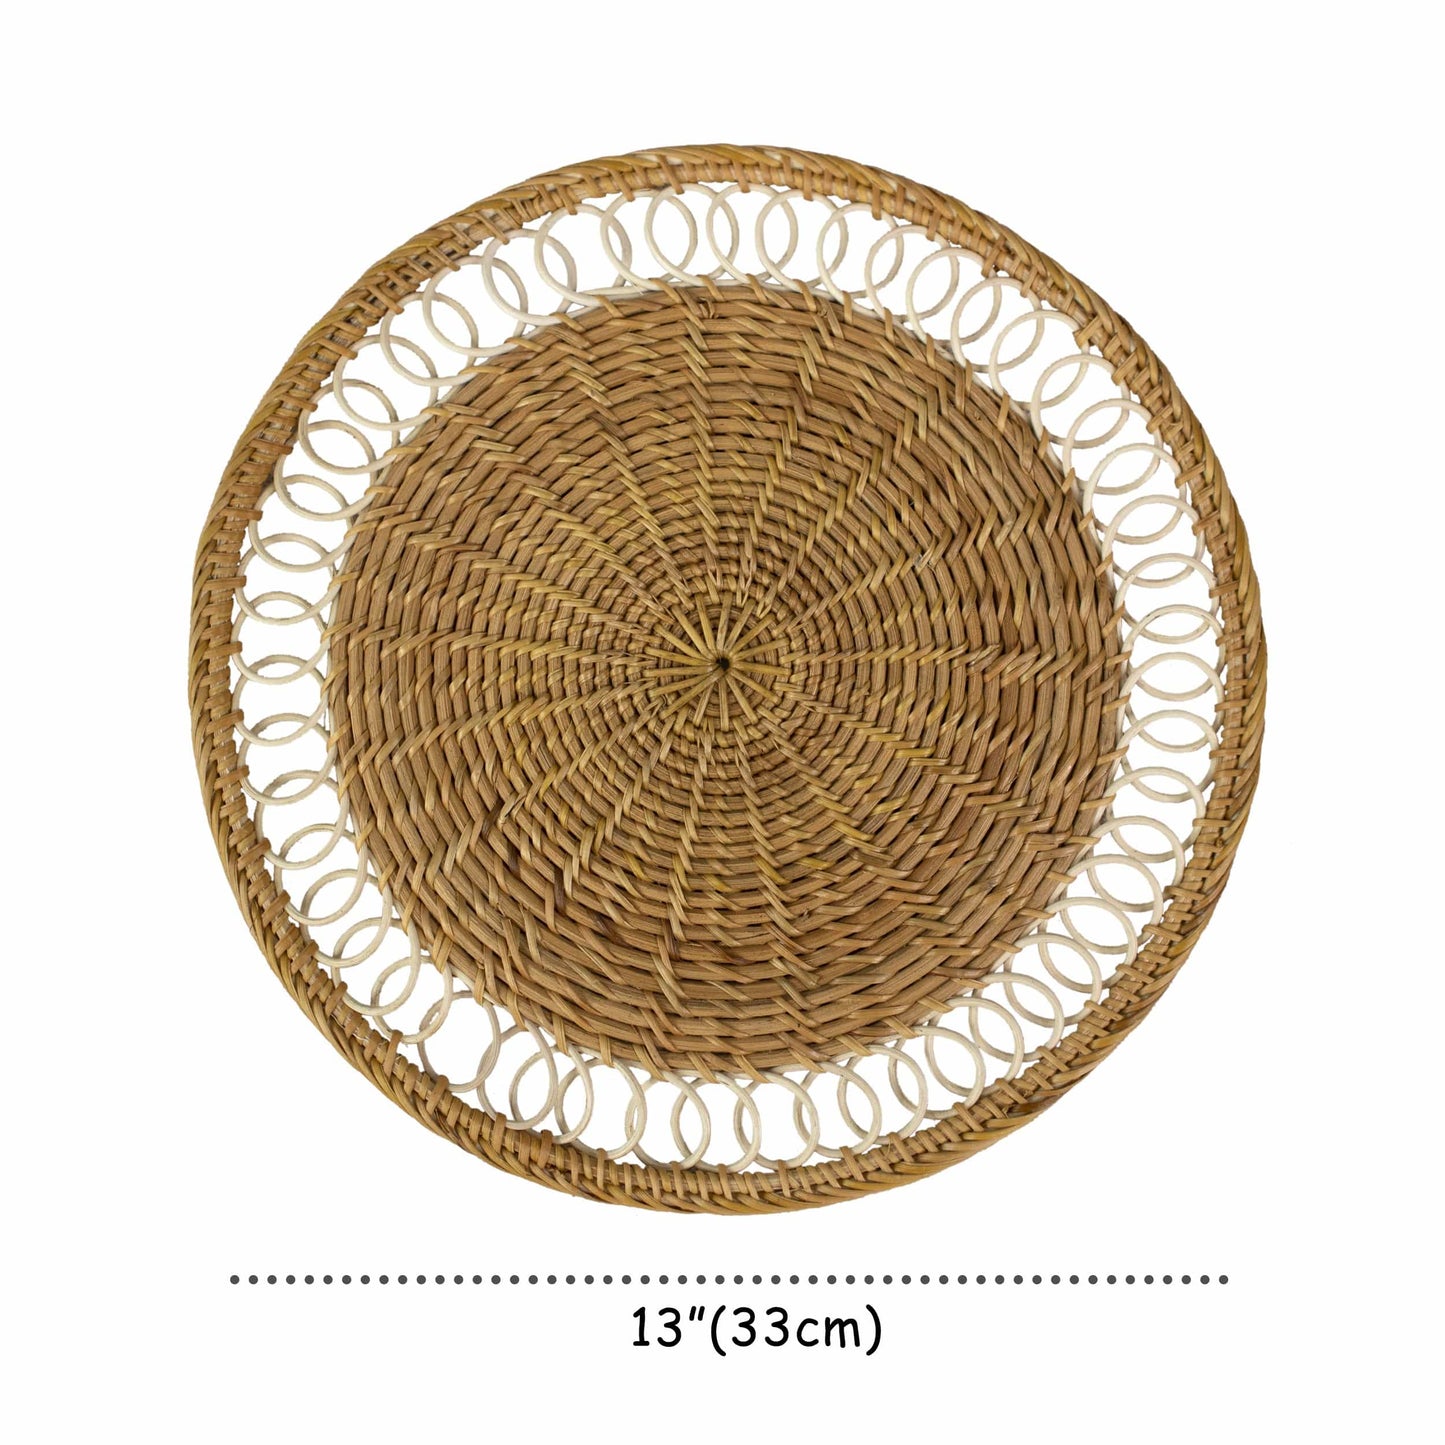 Rattan Woven Placemats for Dining Table | Heat Resistant Non-Slip Wicker Placemat